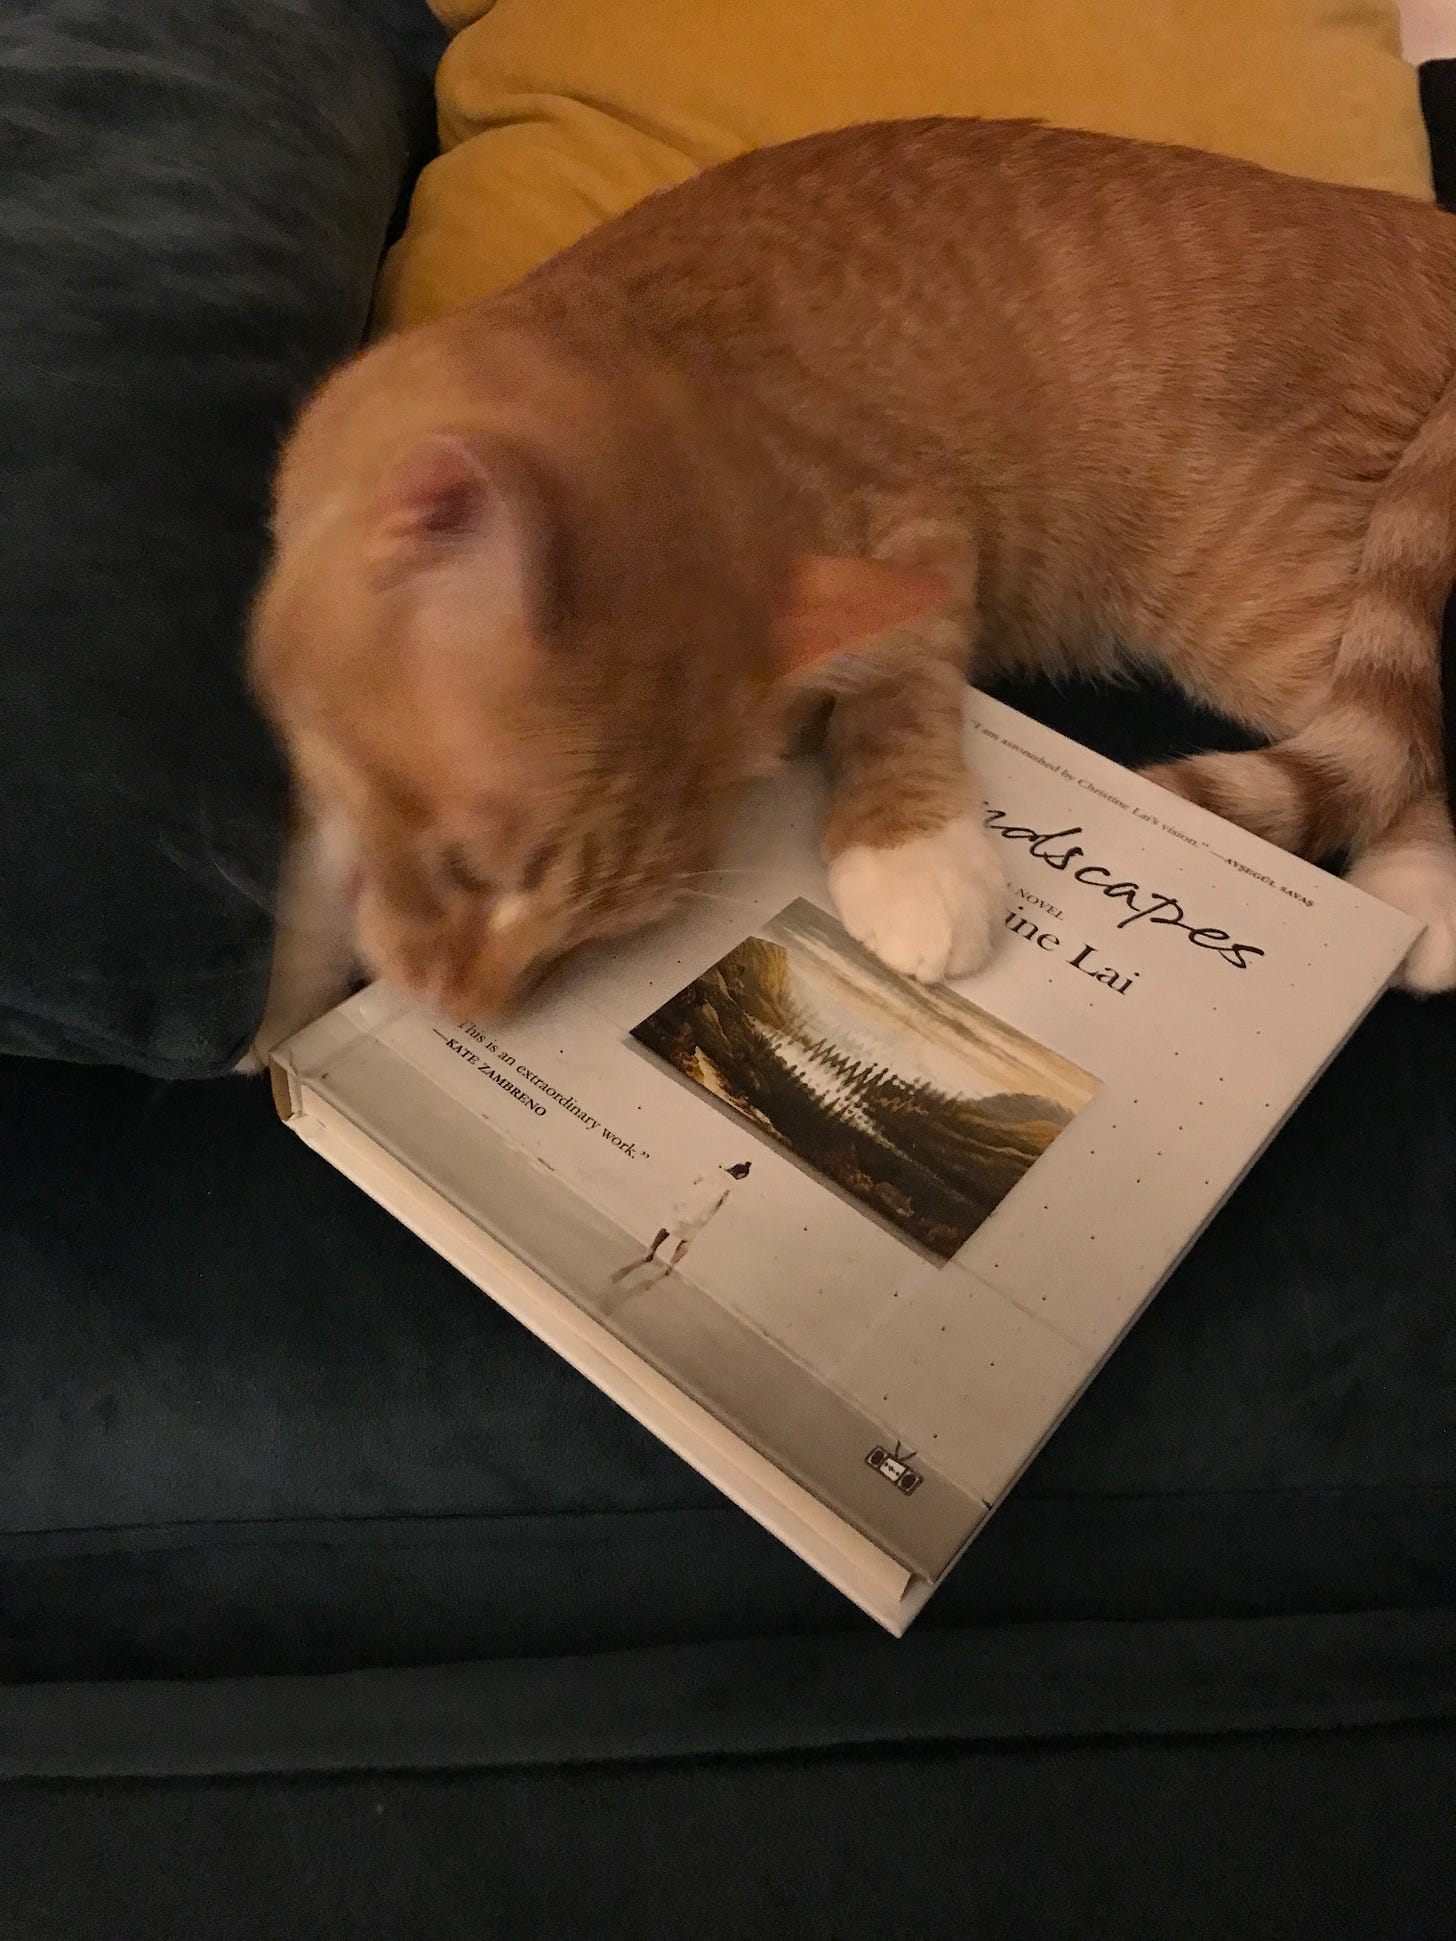 An orange cat simply in the throes of attacking a hardcover book. Really digging those teeth in.